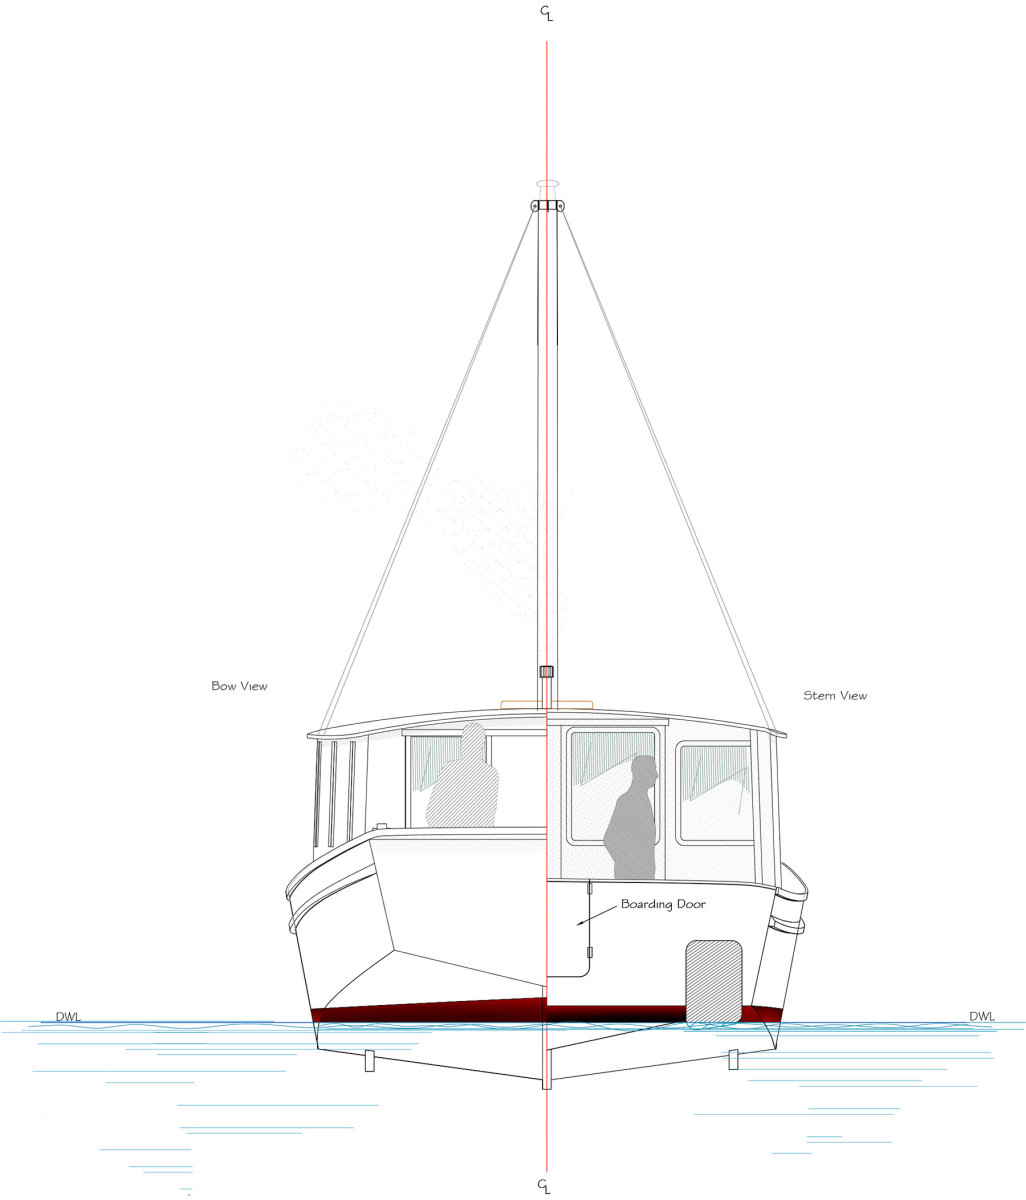 The Shanty has twin bilge keels and a chafe-protected keel that give her substantial bottom protection to match her skinny draft. 